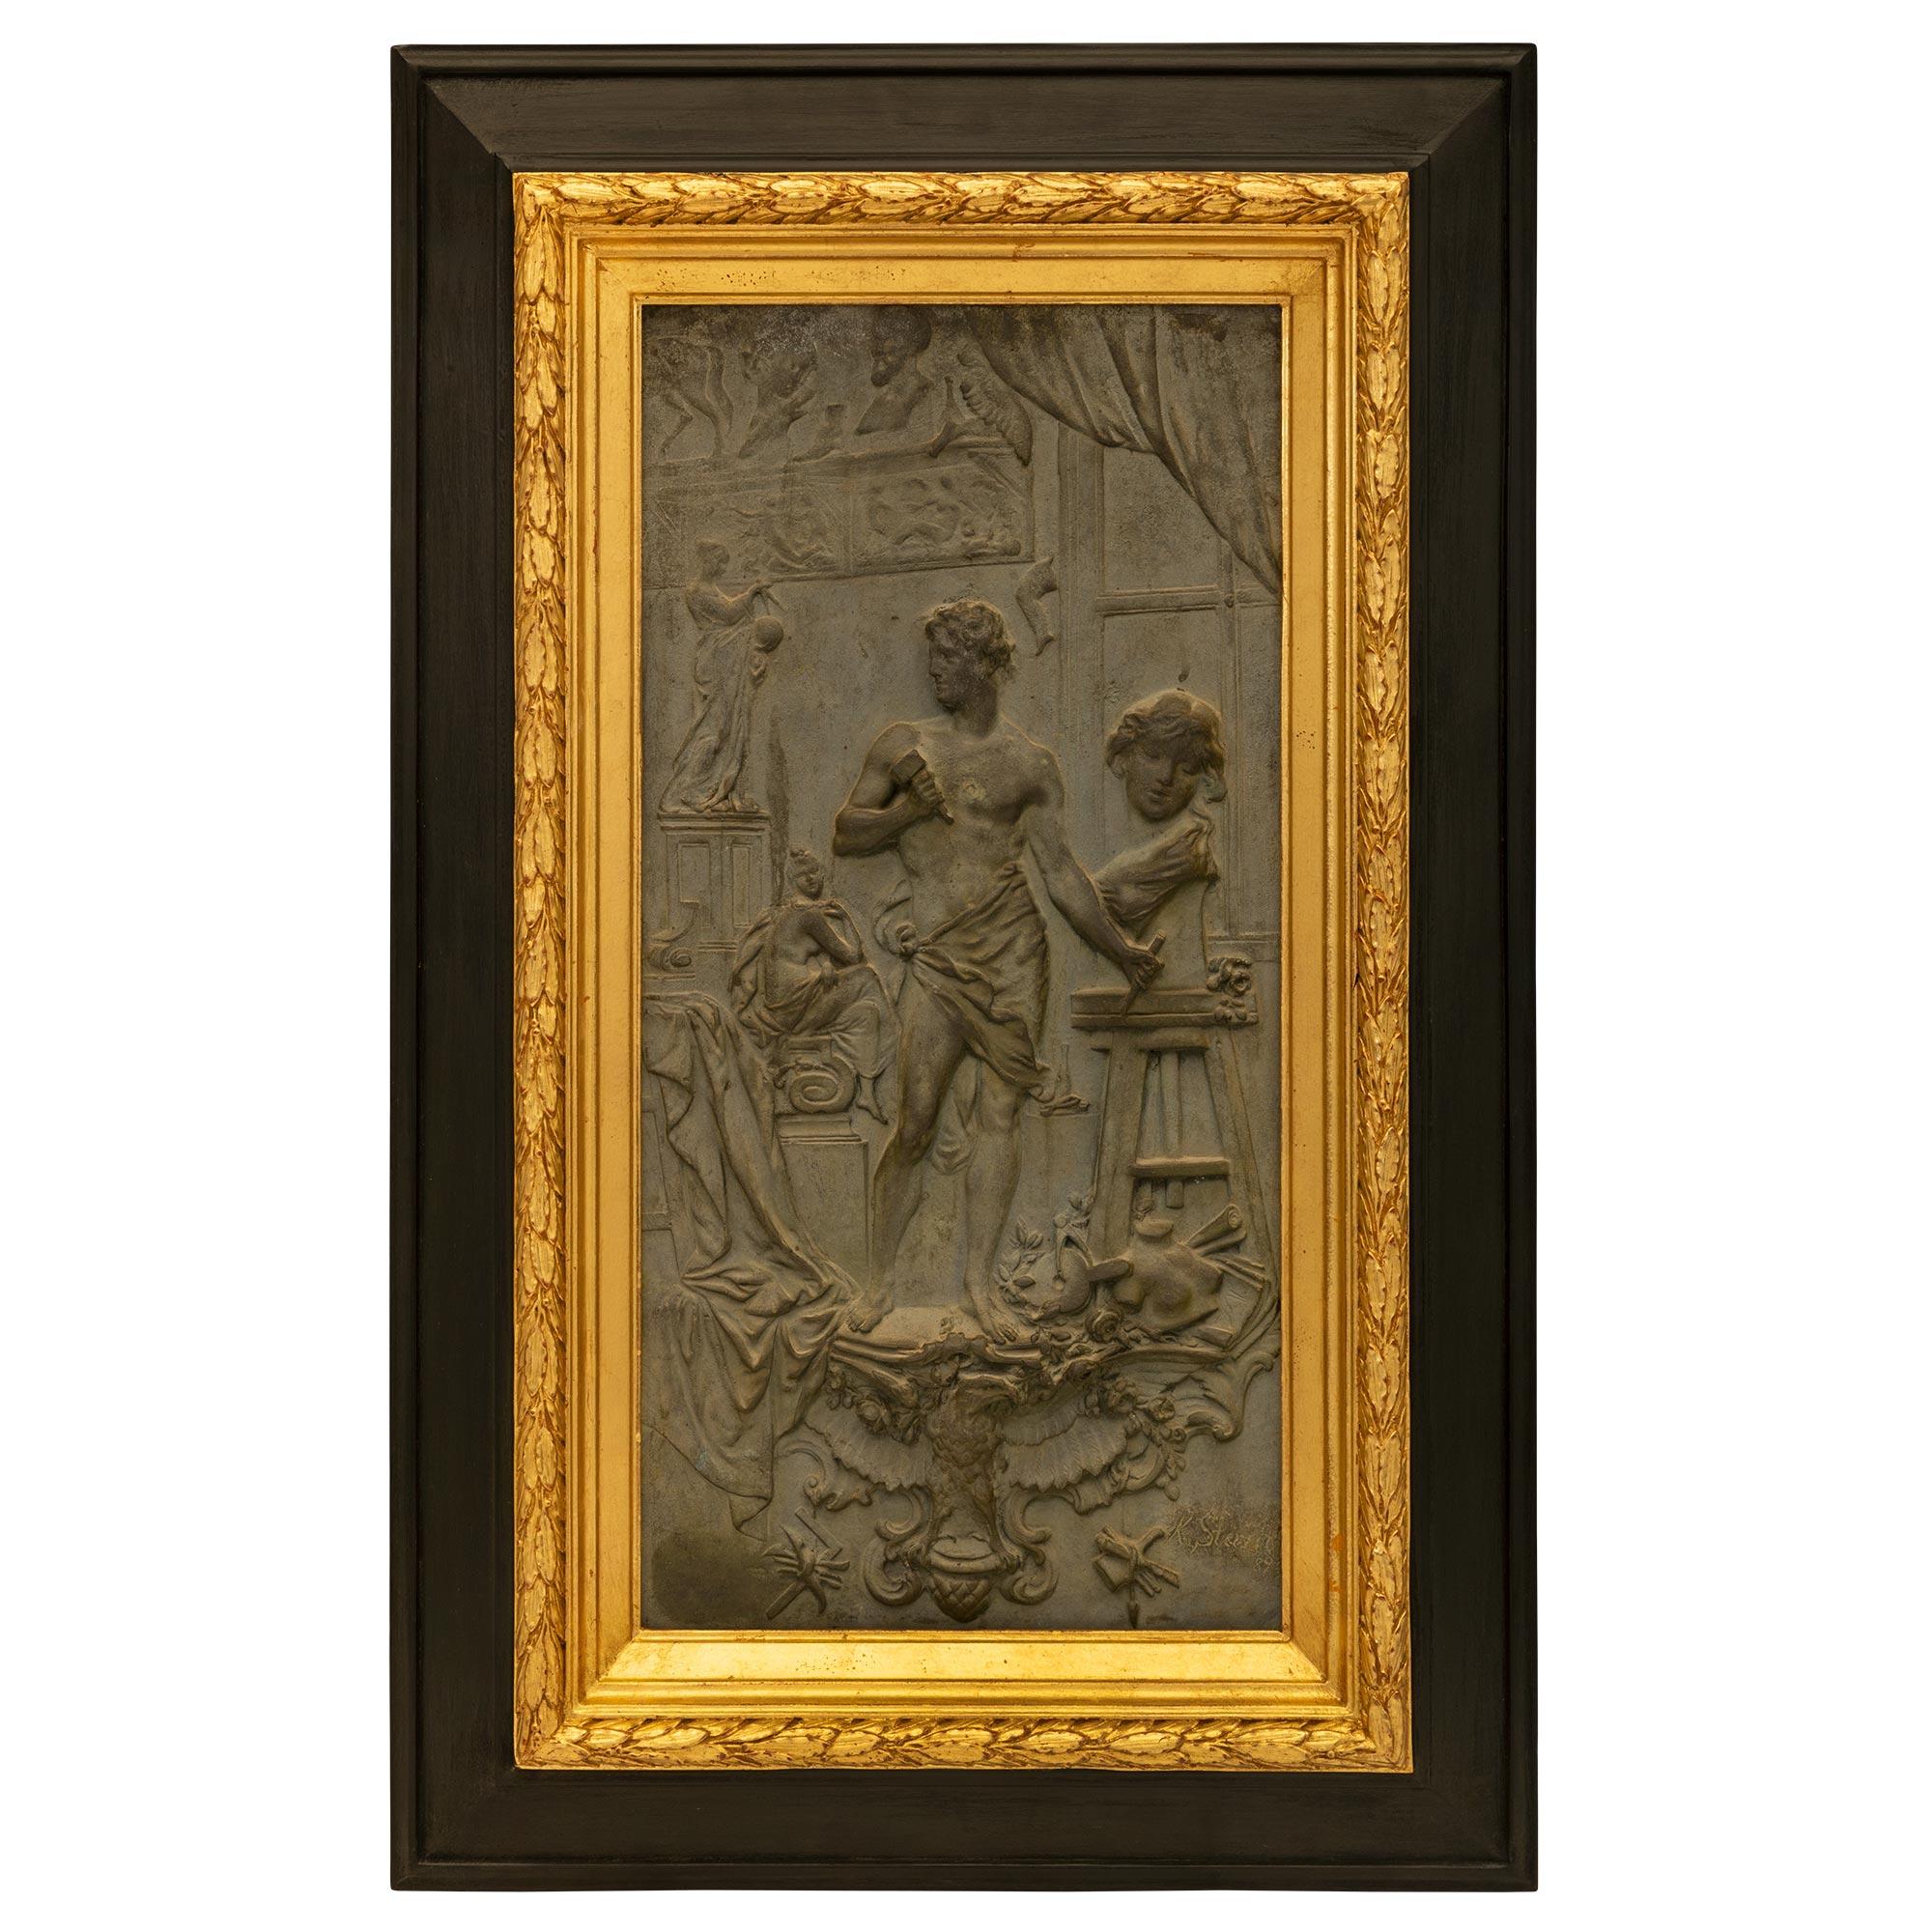 An exceptional and most decorative Austrian 19th century patinated bronze, giltwood and Ebony wall plaque signed K. Sterrer. The striking wall decor is centered by the wonderfully executed patinated bronze plaque depicting a handsome sculptor in his